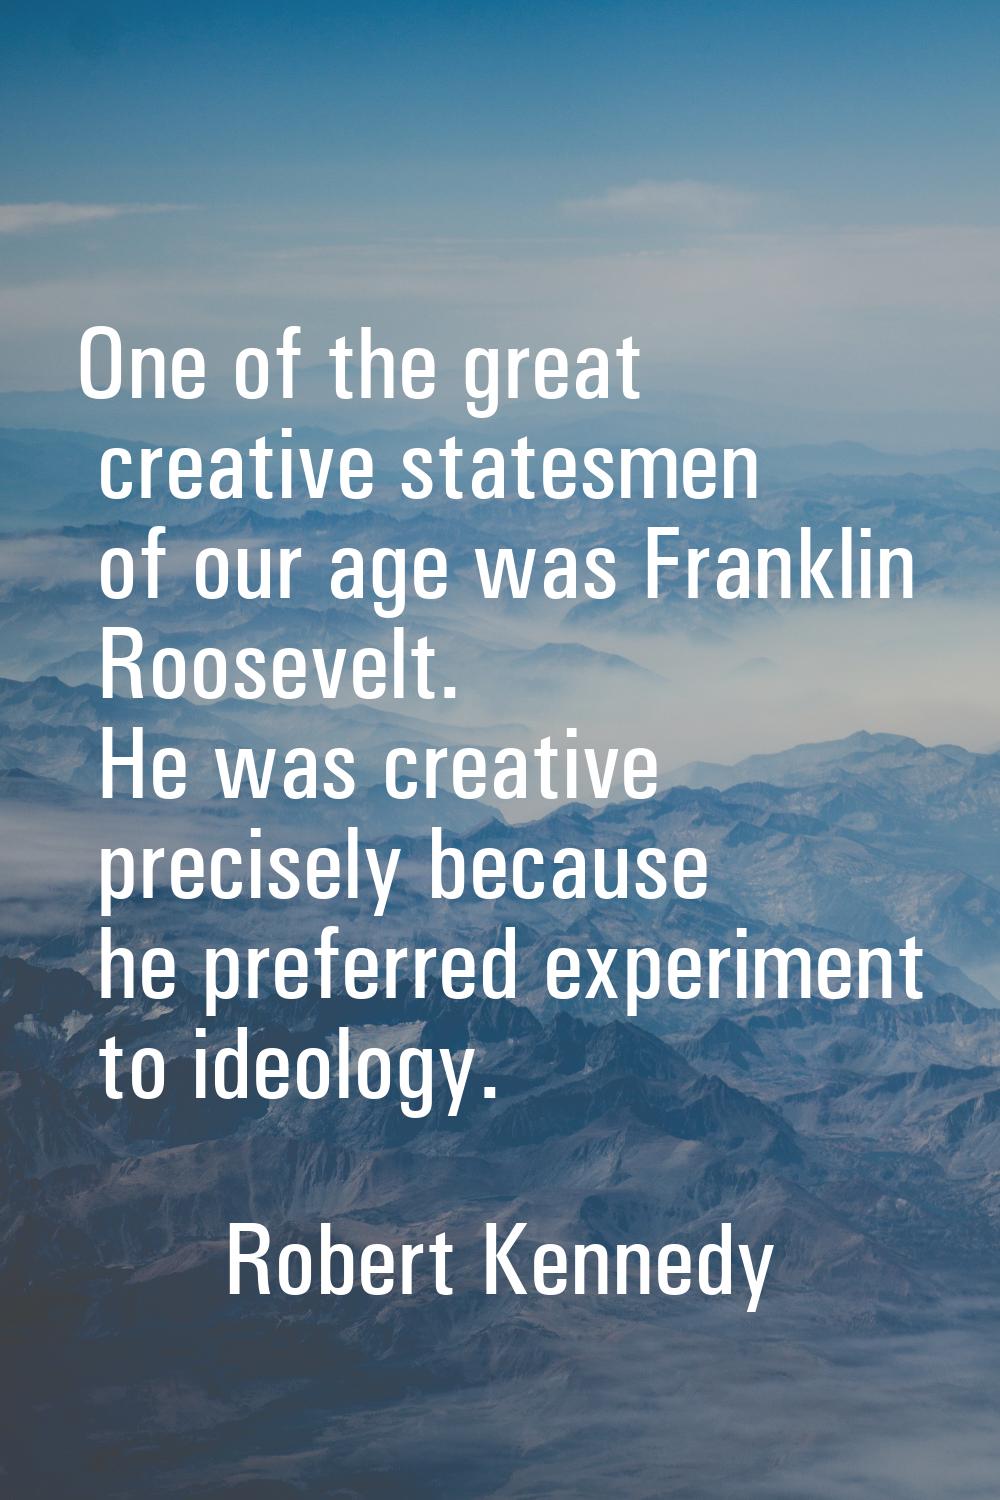 One of the great creative statesmen of our age was Franklin Roosevelt. He was creative precisely be